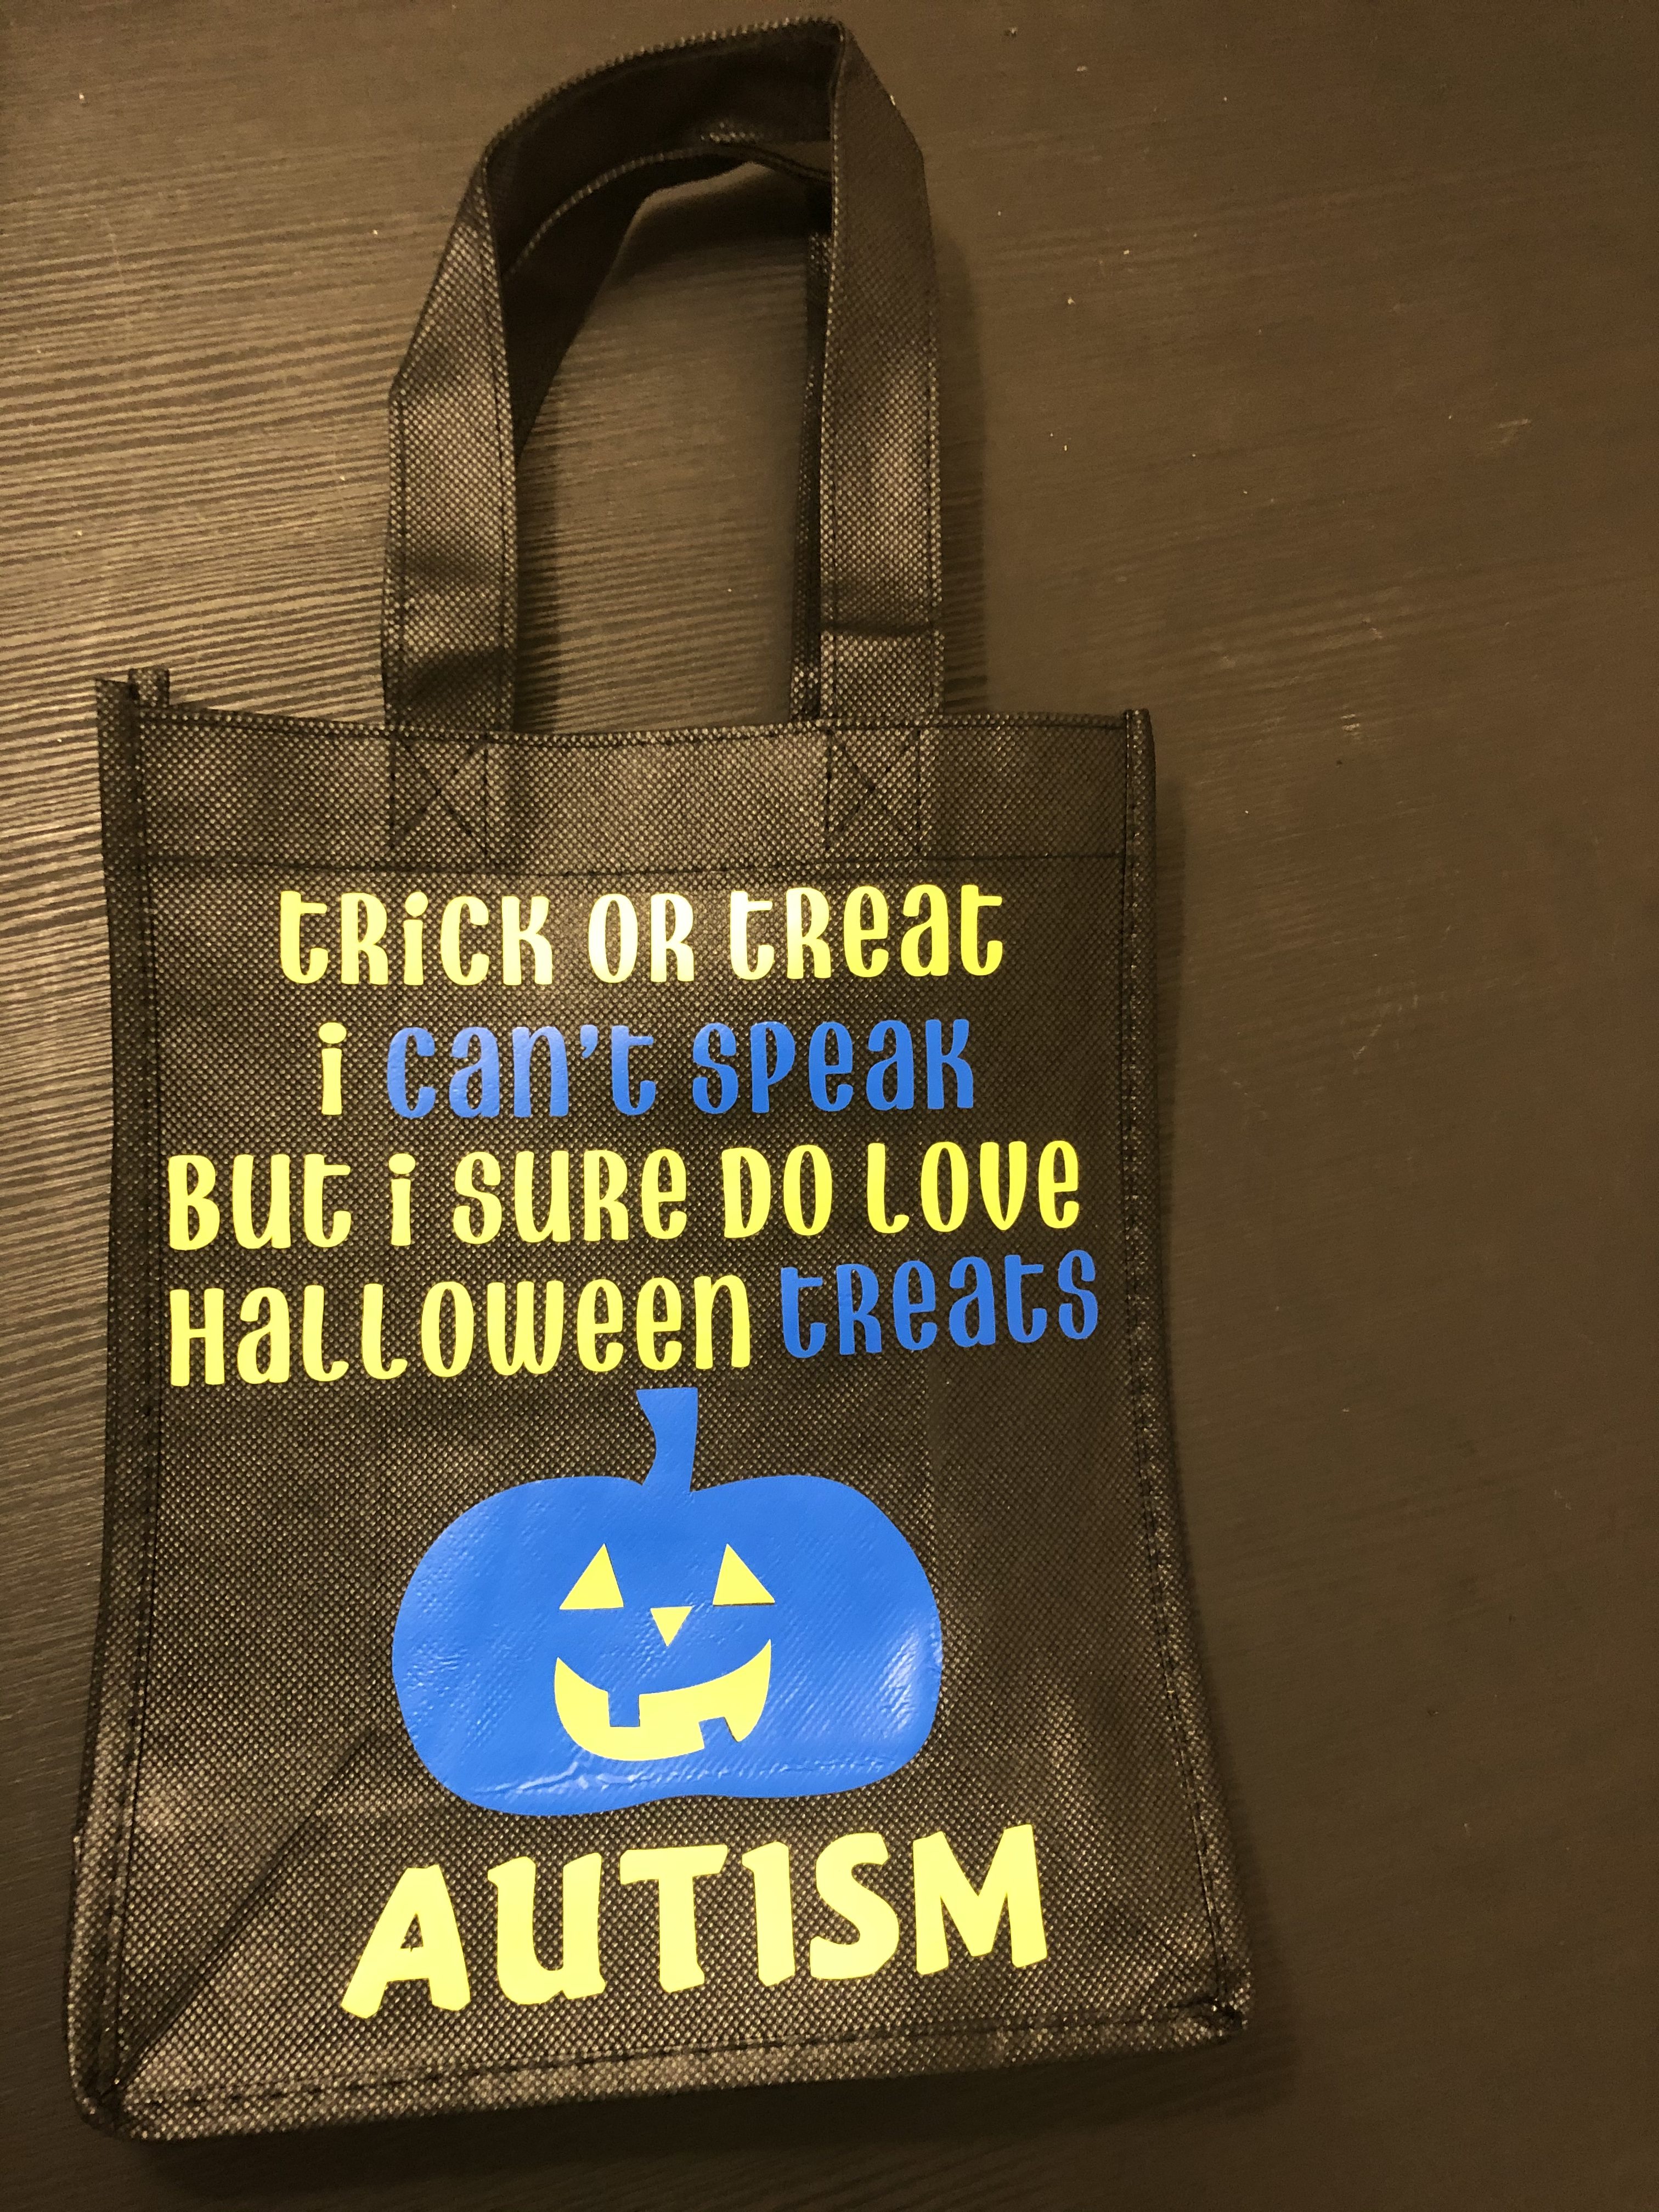 Halloween trick-or-treat bag idea for autistic and/or nonverbal children.